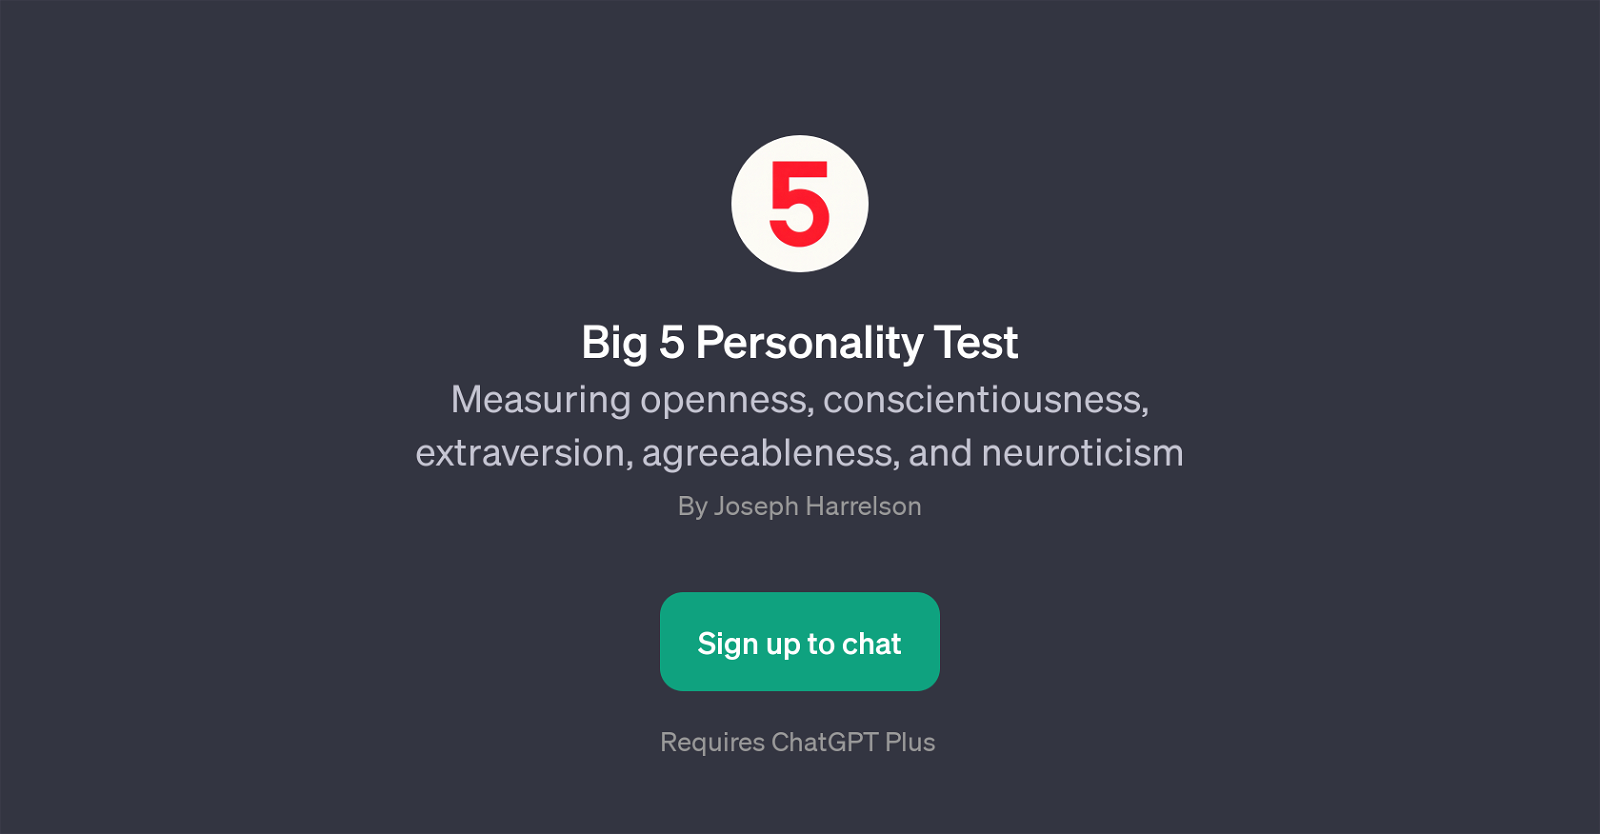 Big 5 Personality Test website